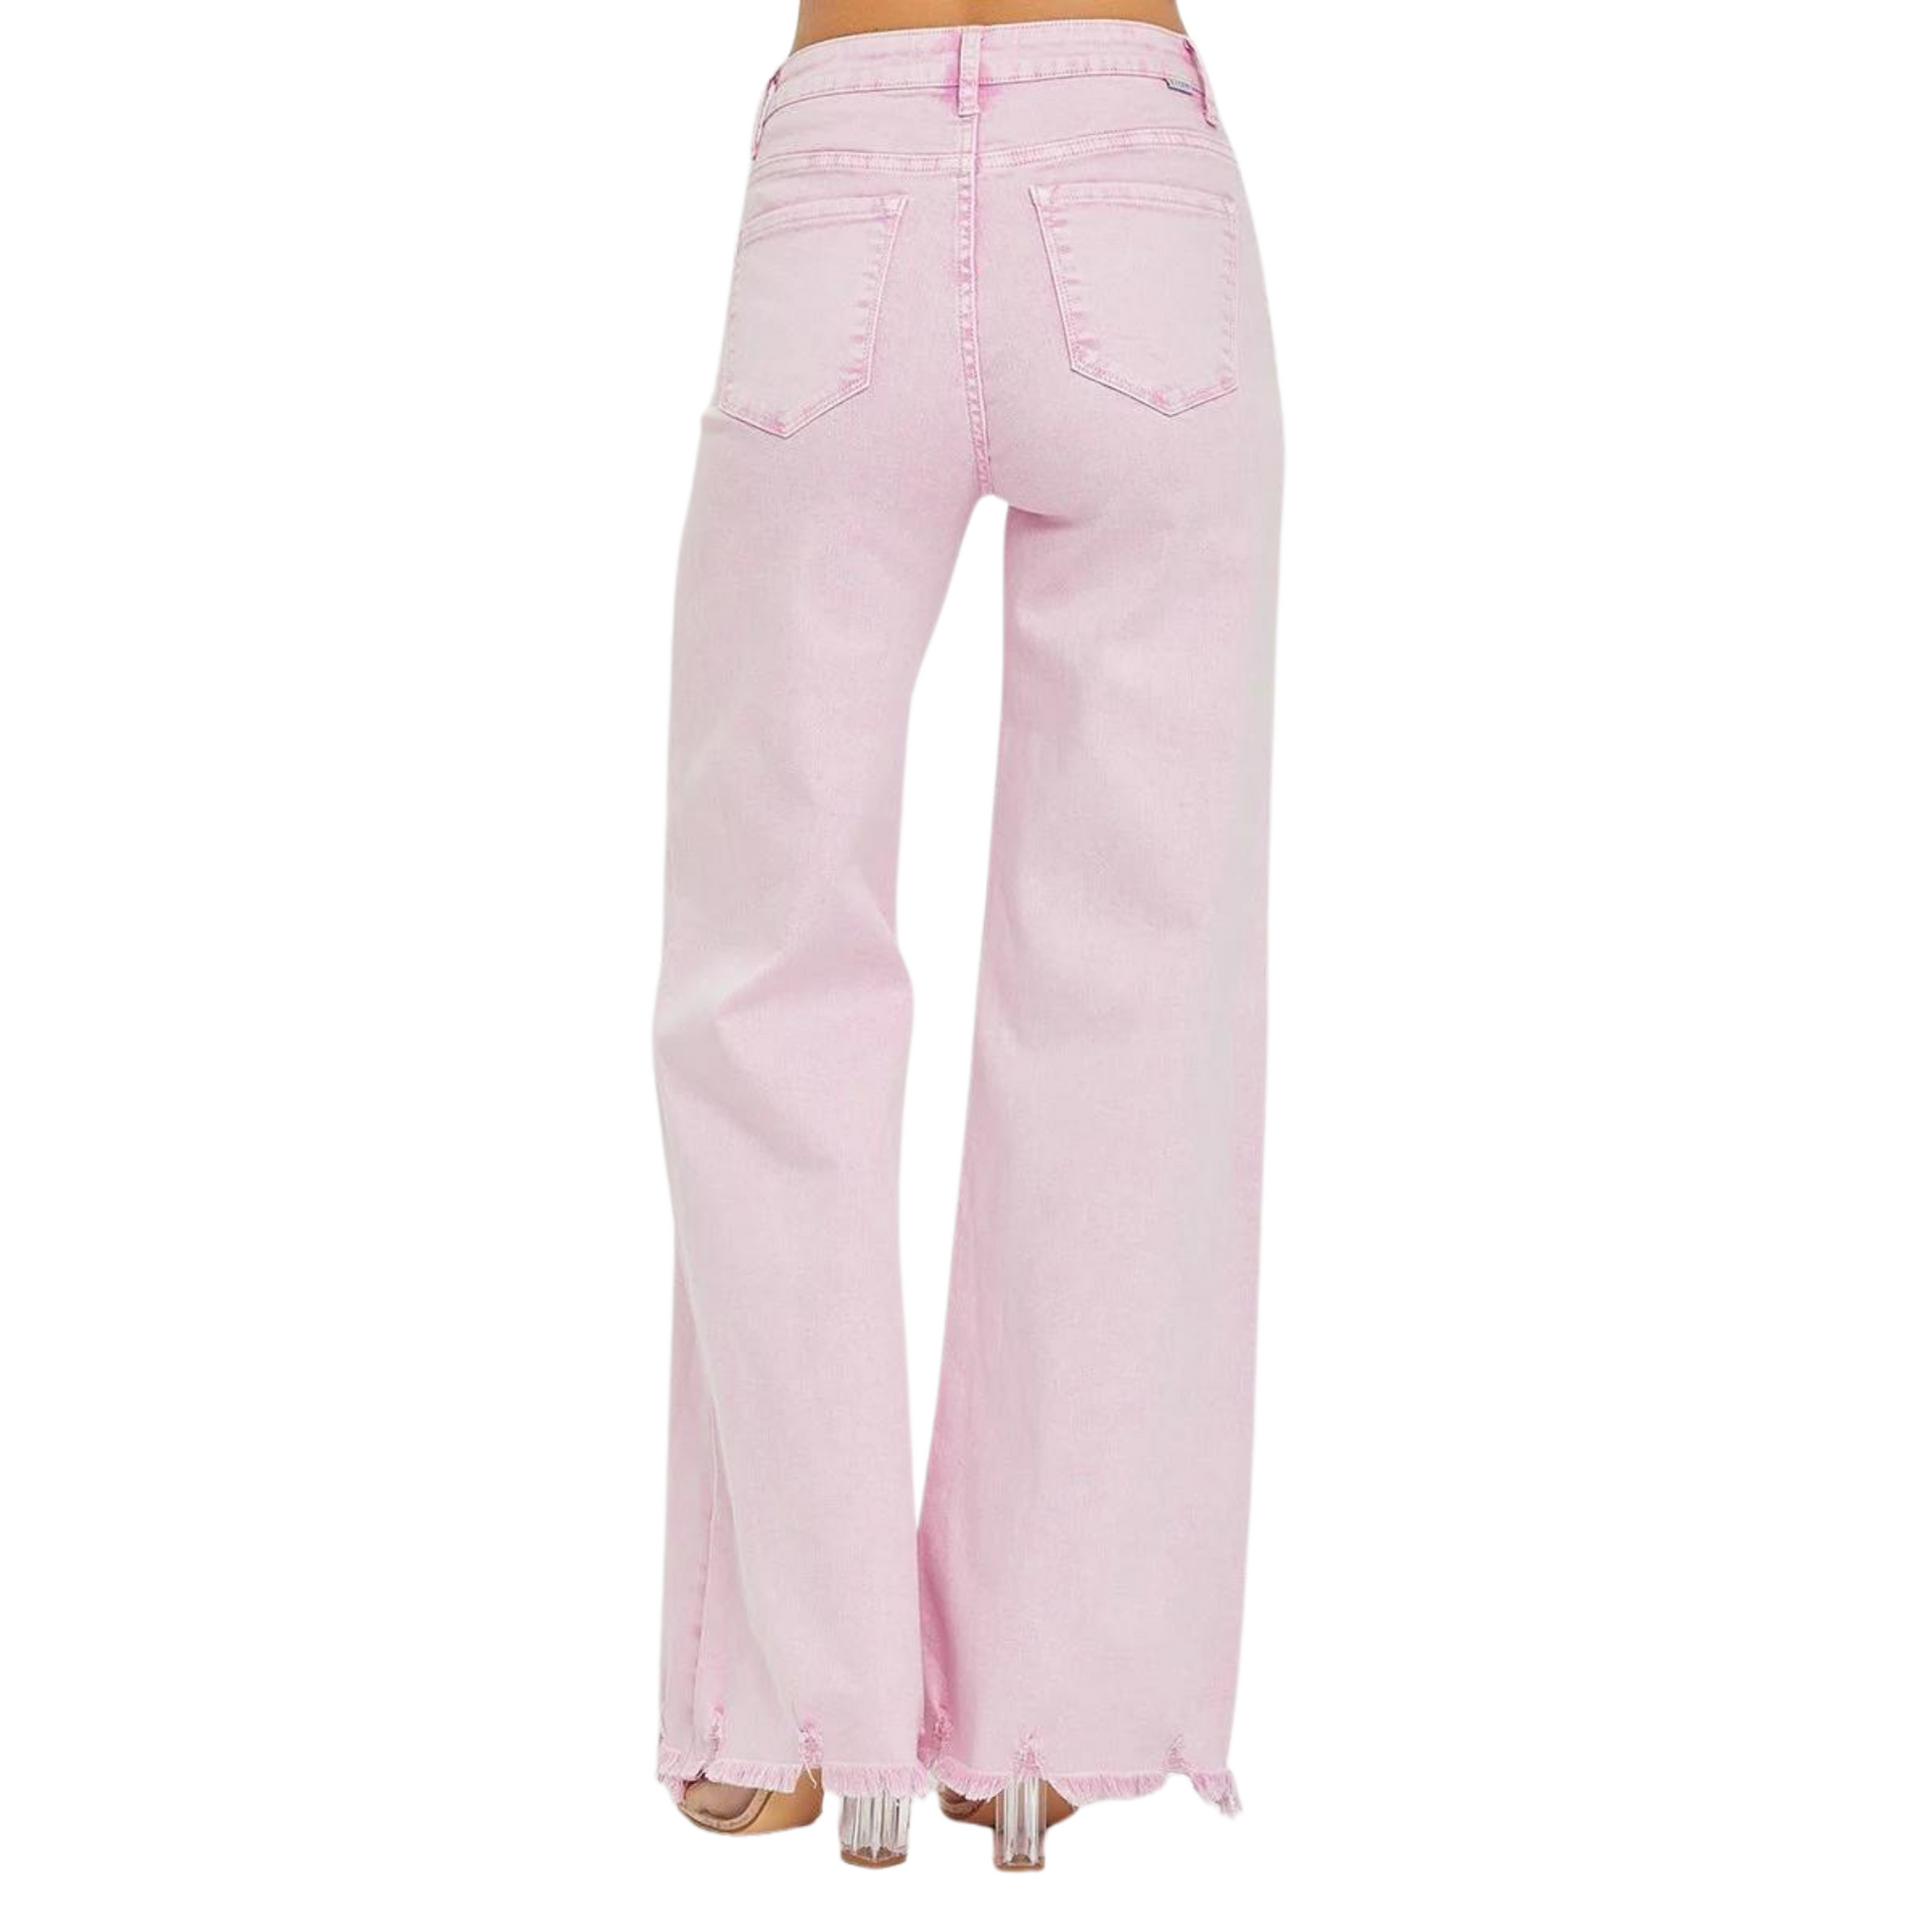 These High Rise Straight Leg Jeans from Risen are designed to flatter with their tummy control feature. The raw hem and side slit add a trendy touch to the classic straight leg style, while the acid pink color adds a unique pop of color. Elevate your denim game with these chic and comfortable jeans.